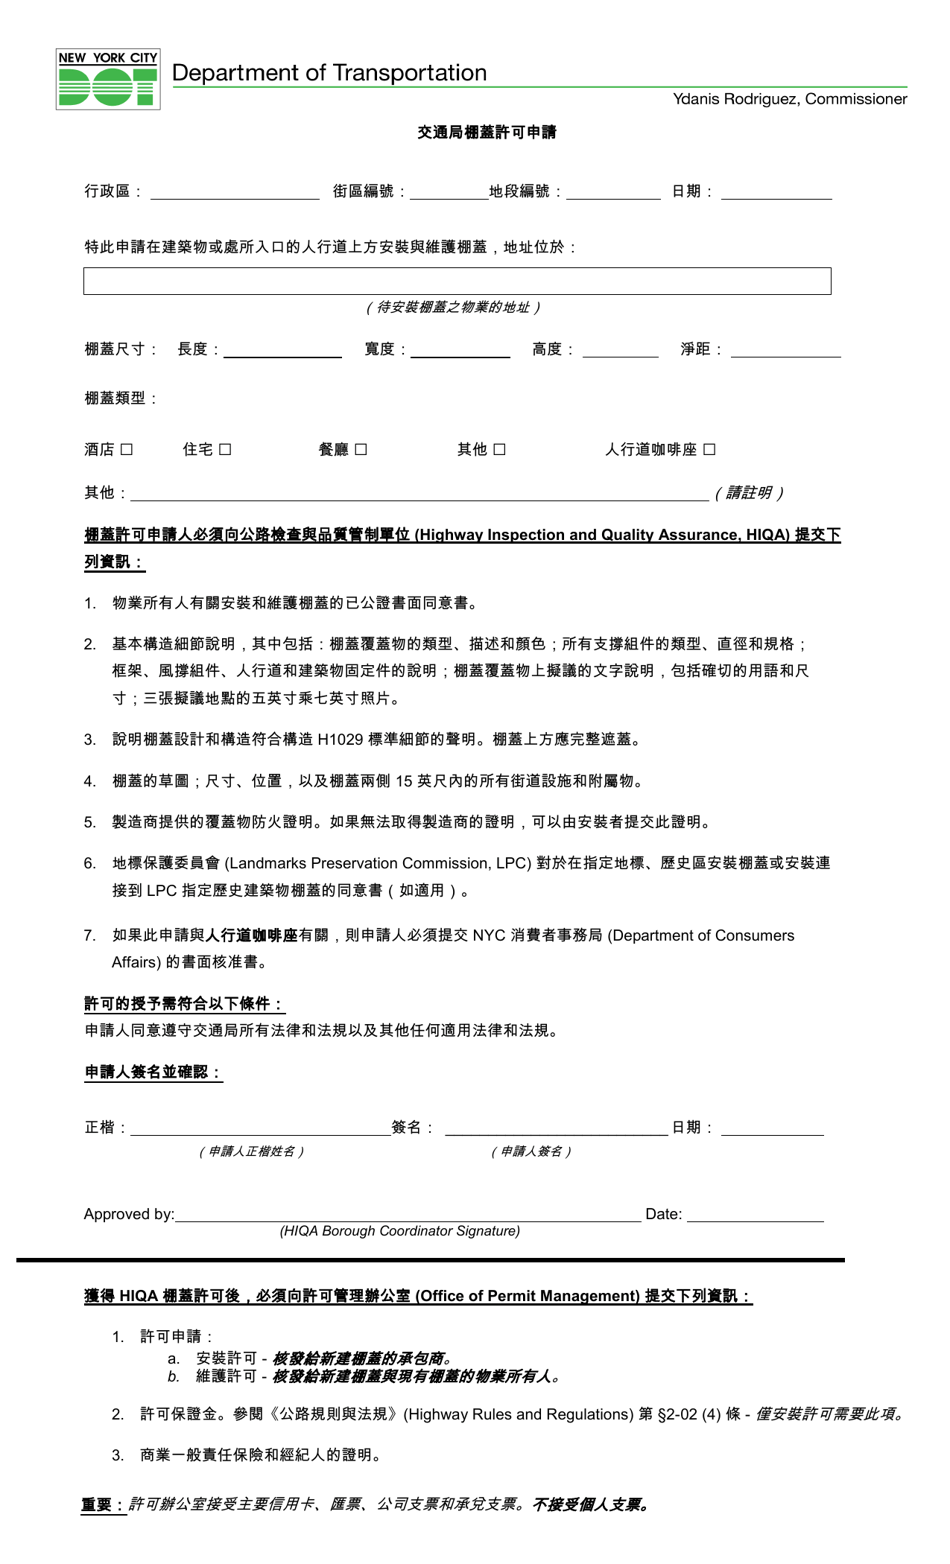 Canopy Authorization Application - New York City (Chinese), Page 1